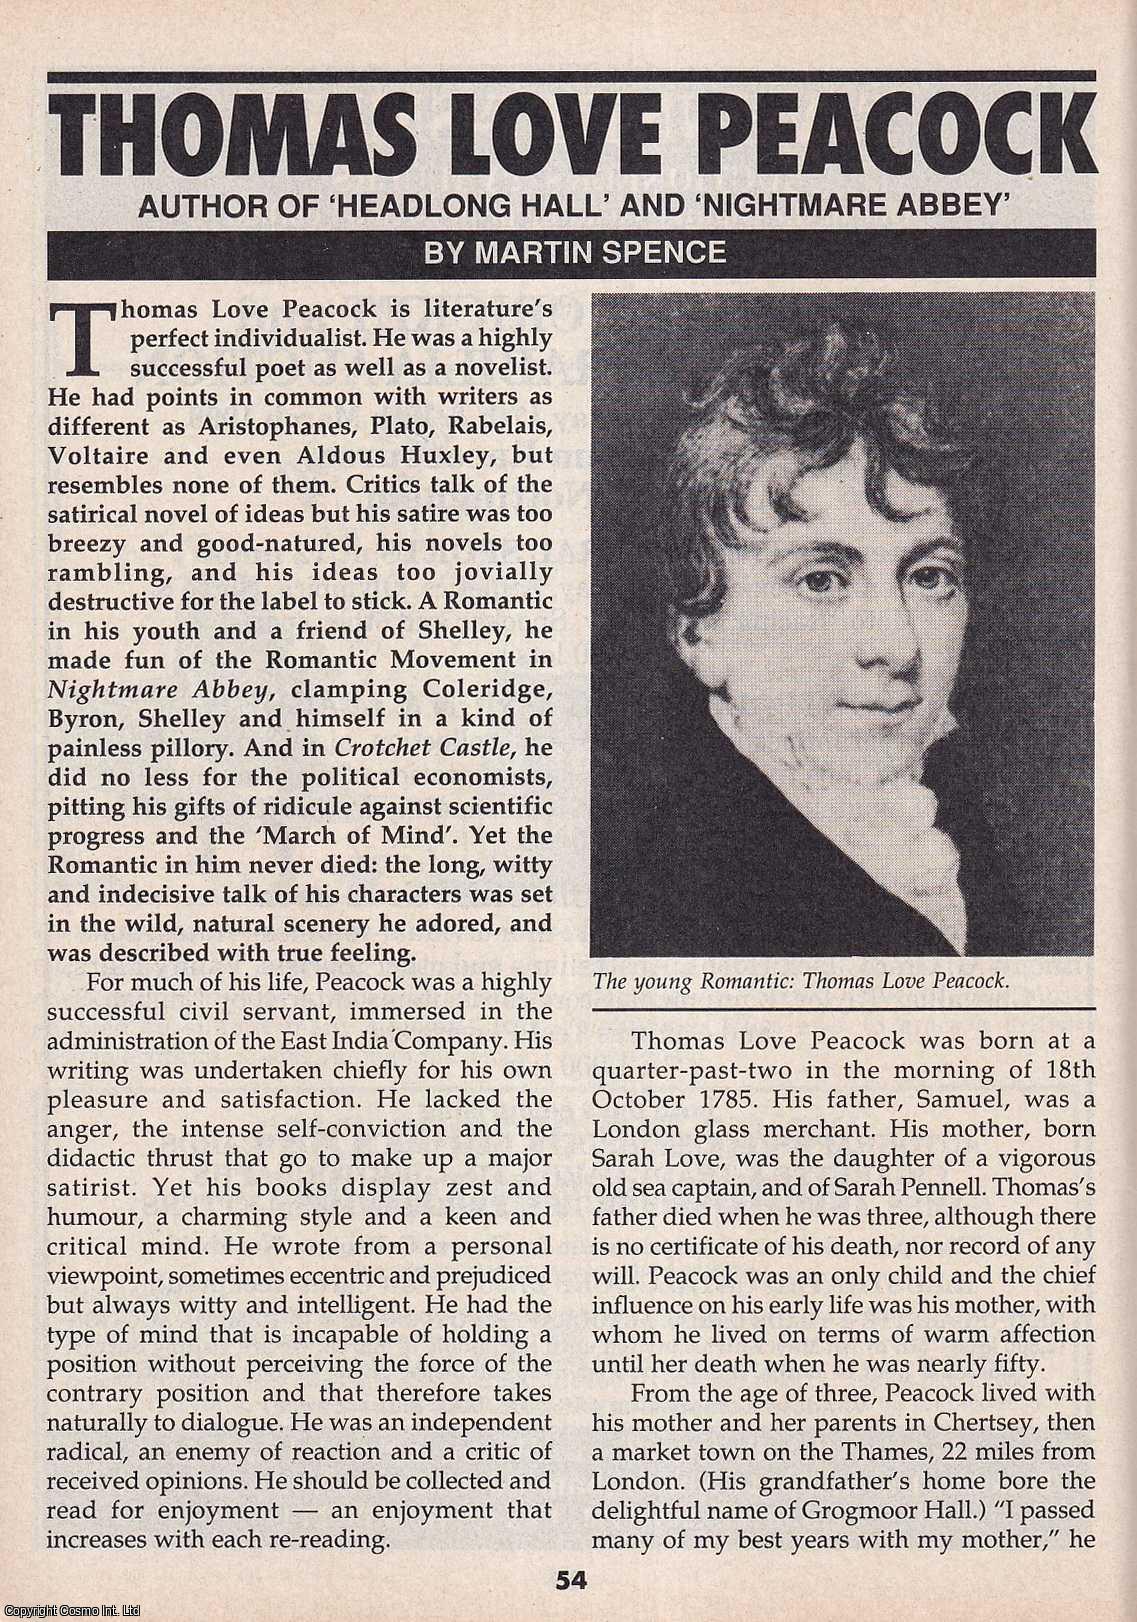 Martin Spence - Thomas Love Peacock. Author of The Headlong Hall. This is an original article separated from an issue of The Book & Magazine Collector publication.